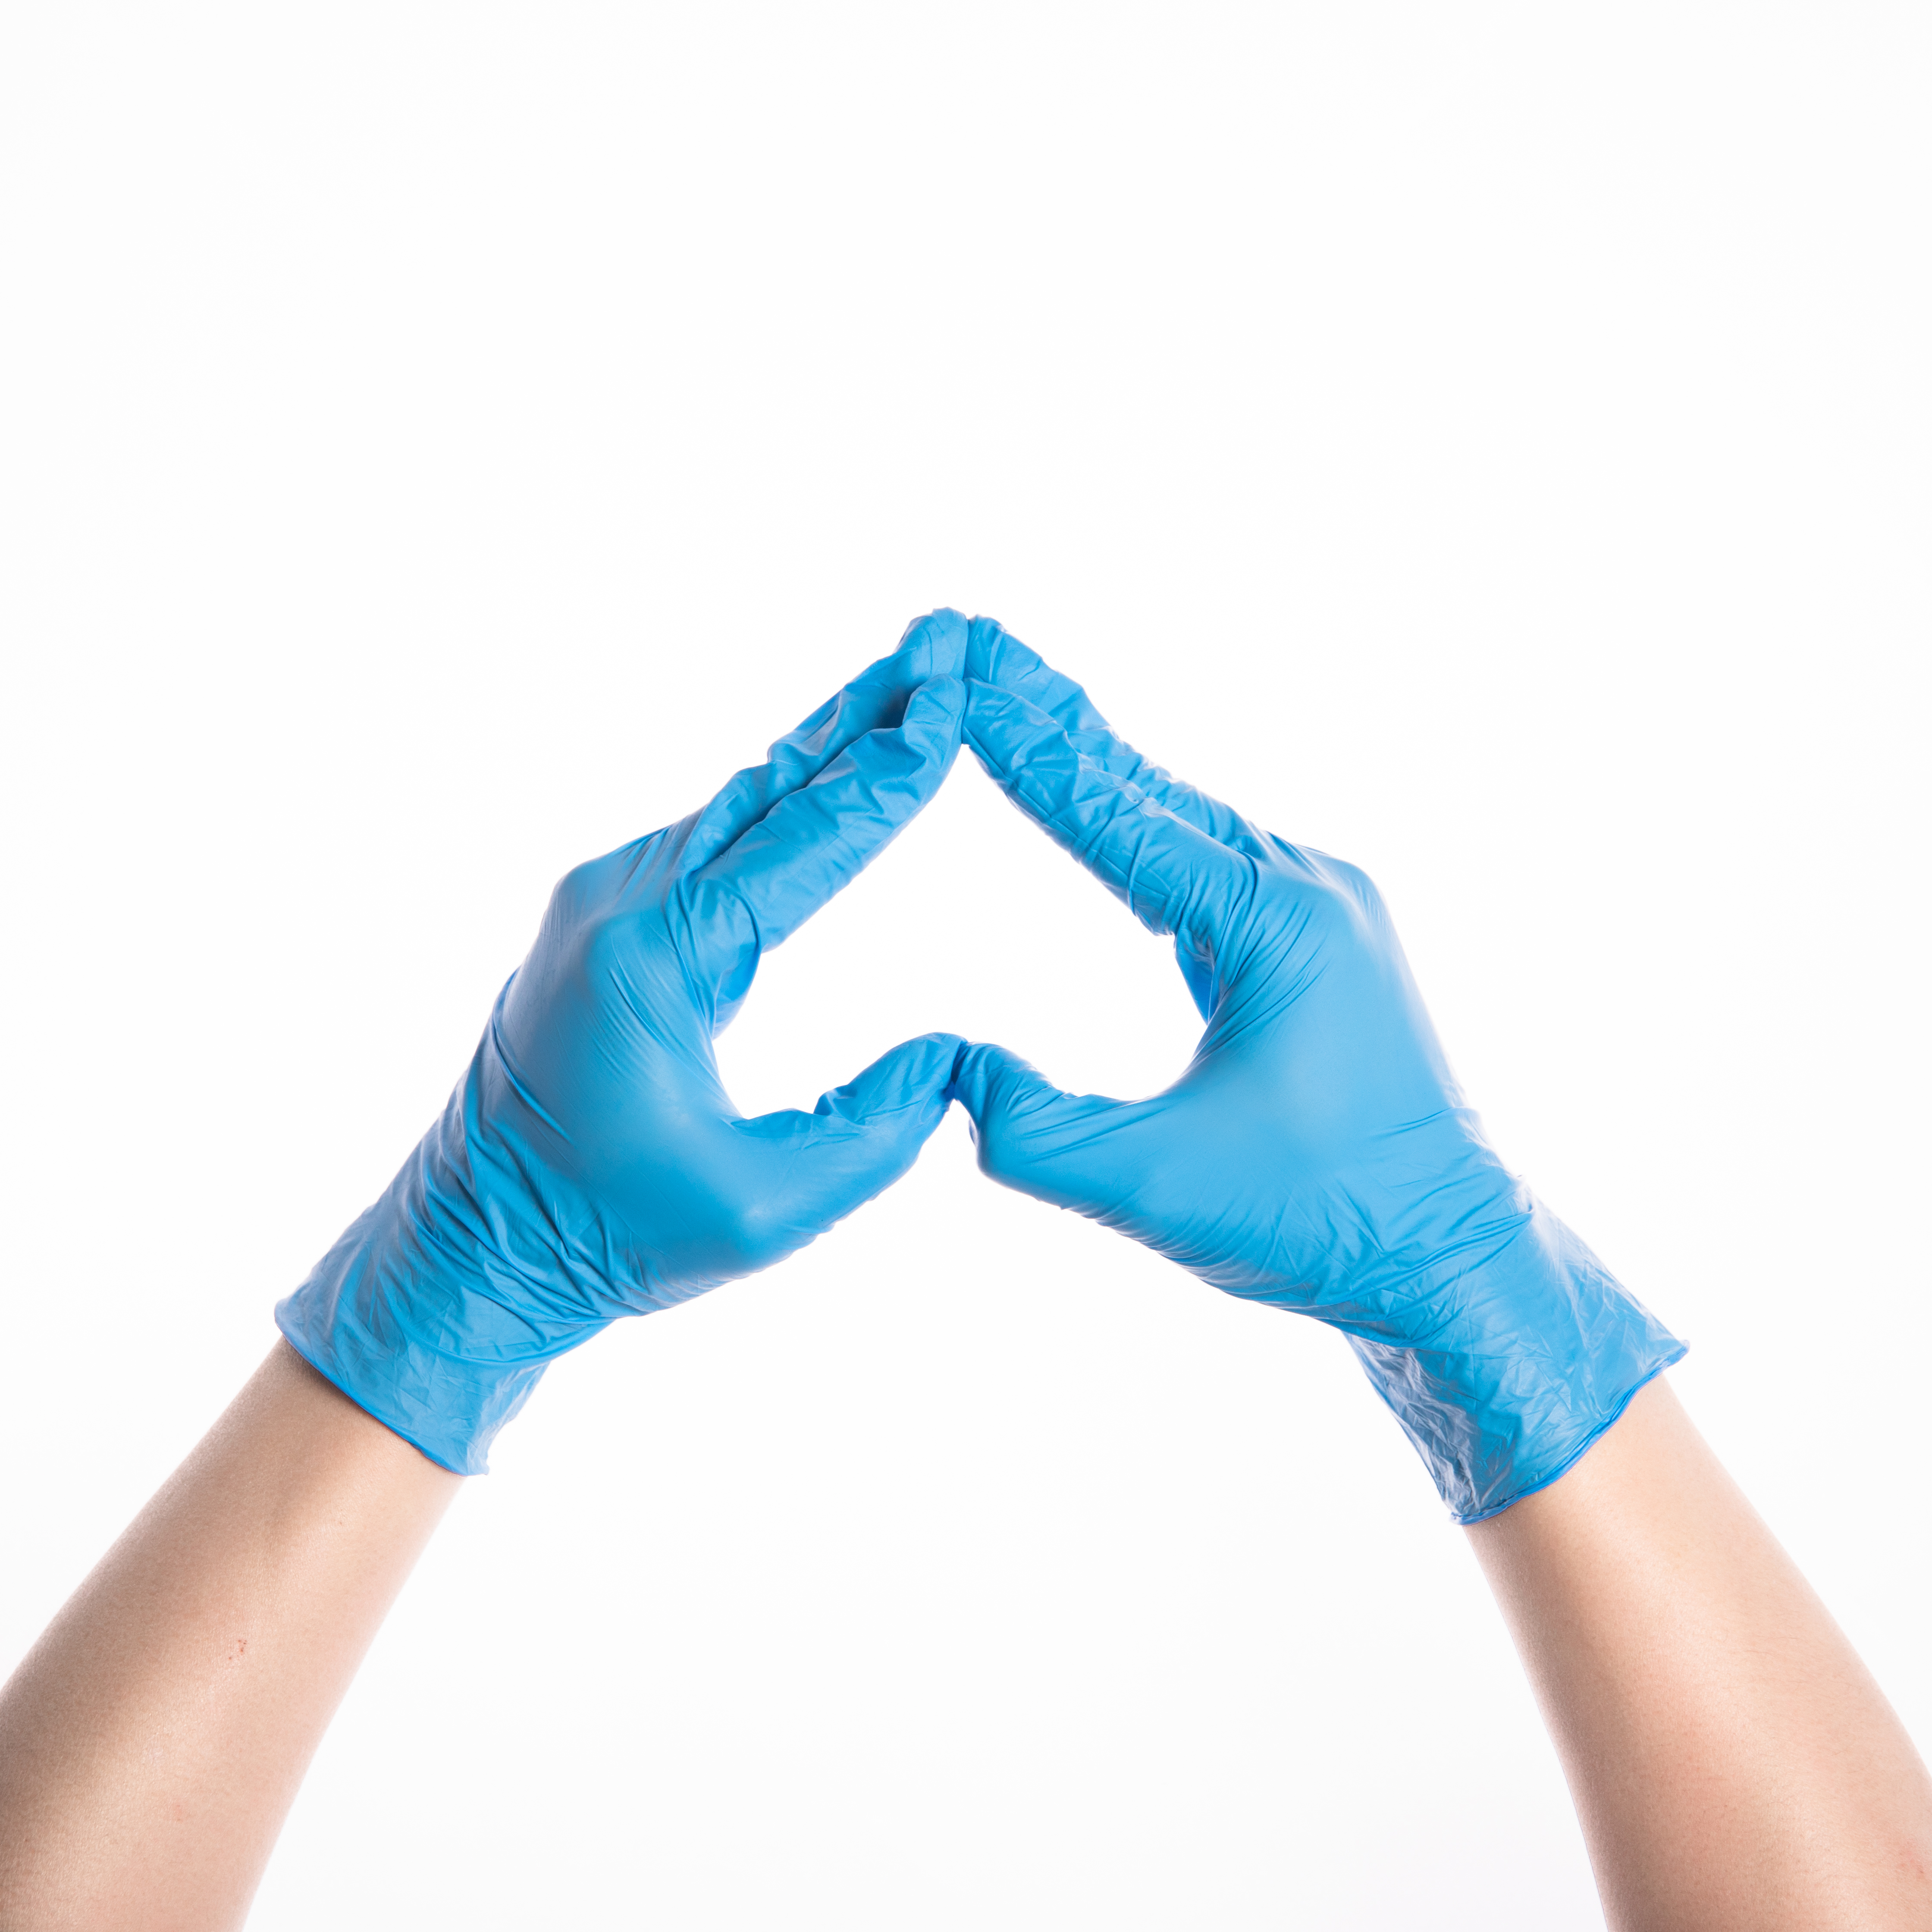 Disposable Nitrile Gloves/Recycling Used Non-medical Powder-free Nitril Gloves